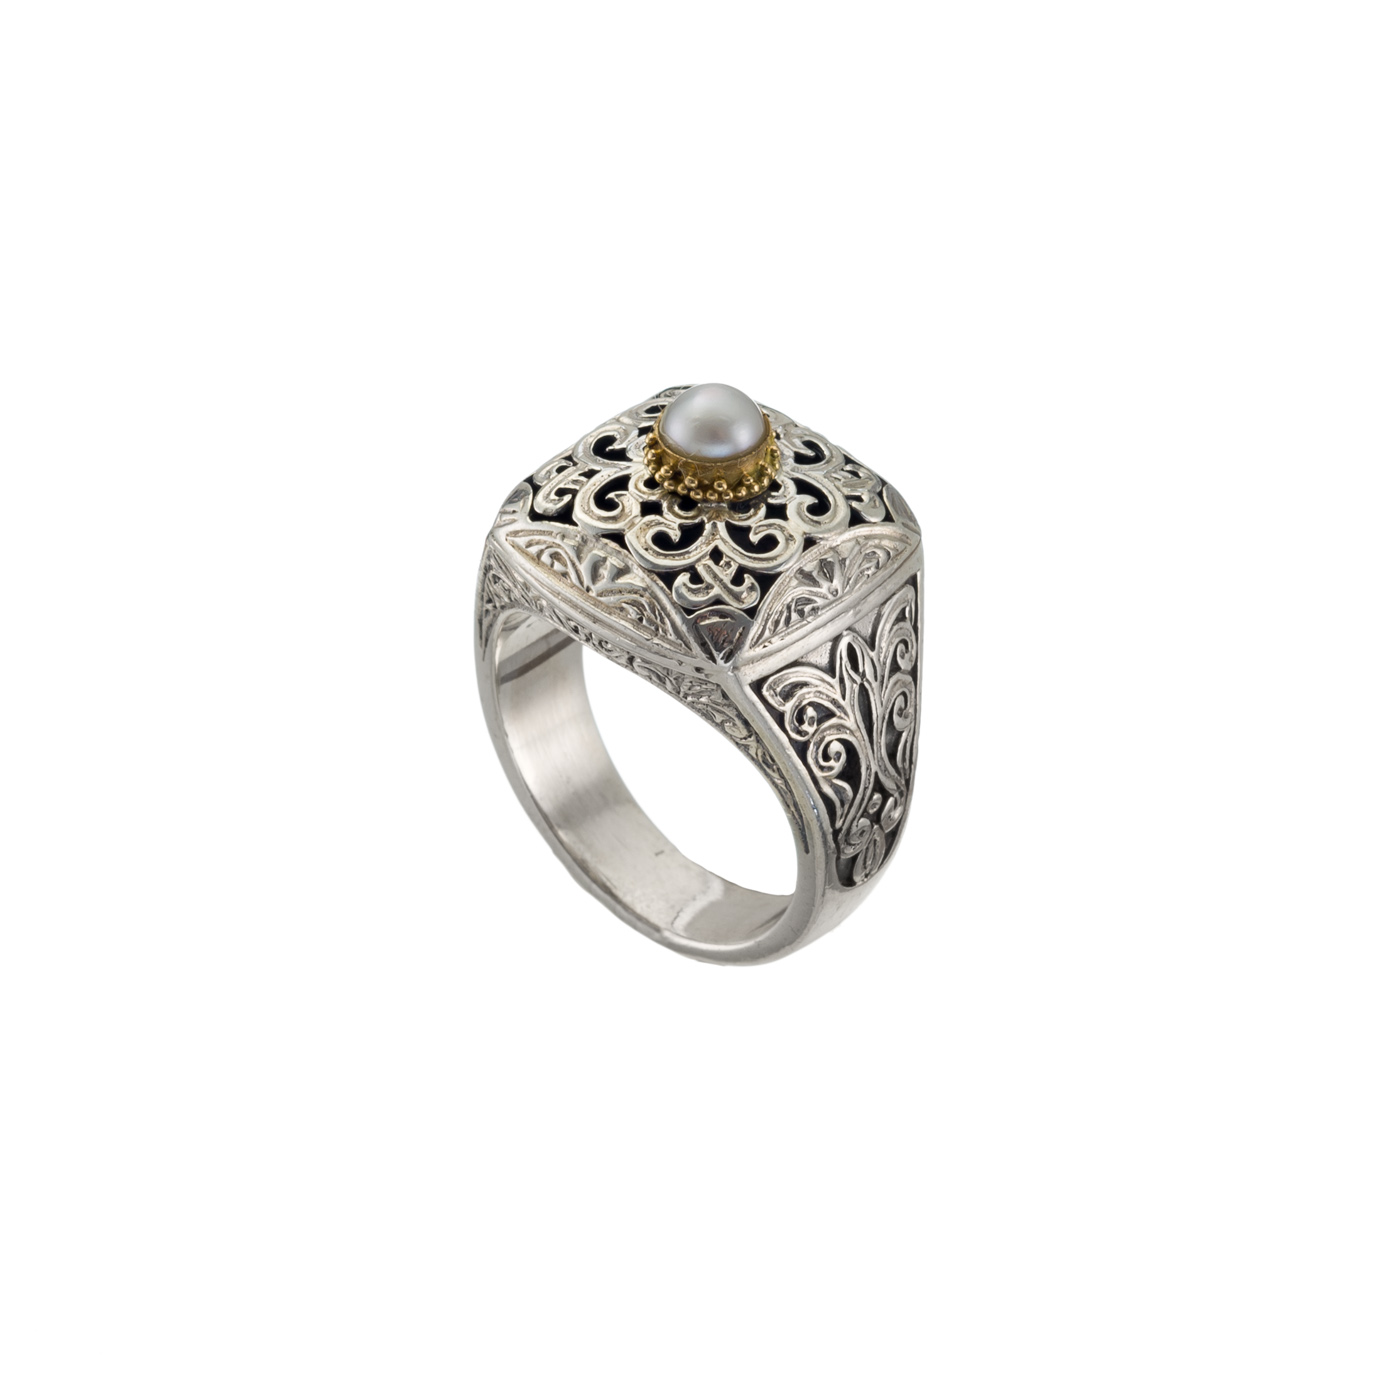 Garden shadows Ring in 18K Gold and sterling silver with pearl